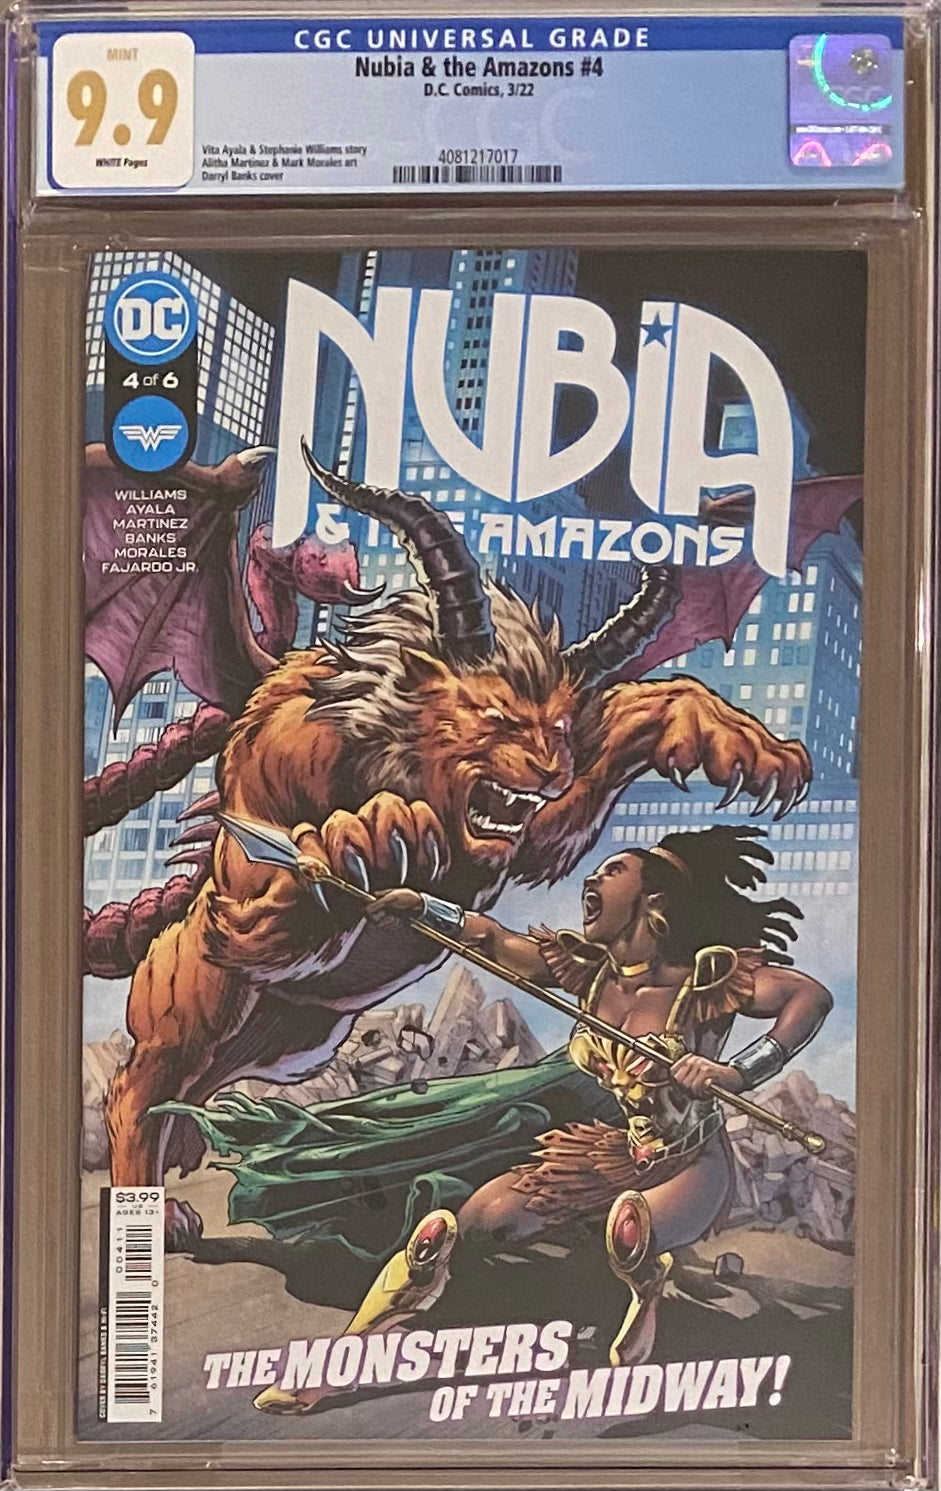 Nubia and the Amazons #4 CGC 9.9 MINT